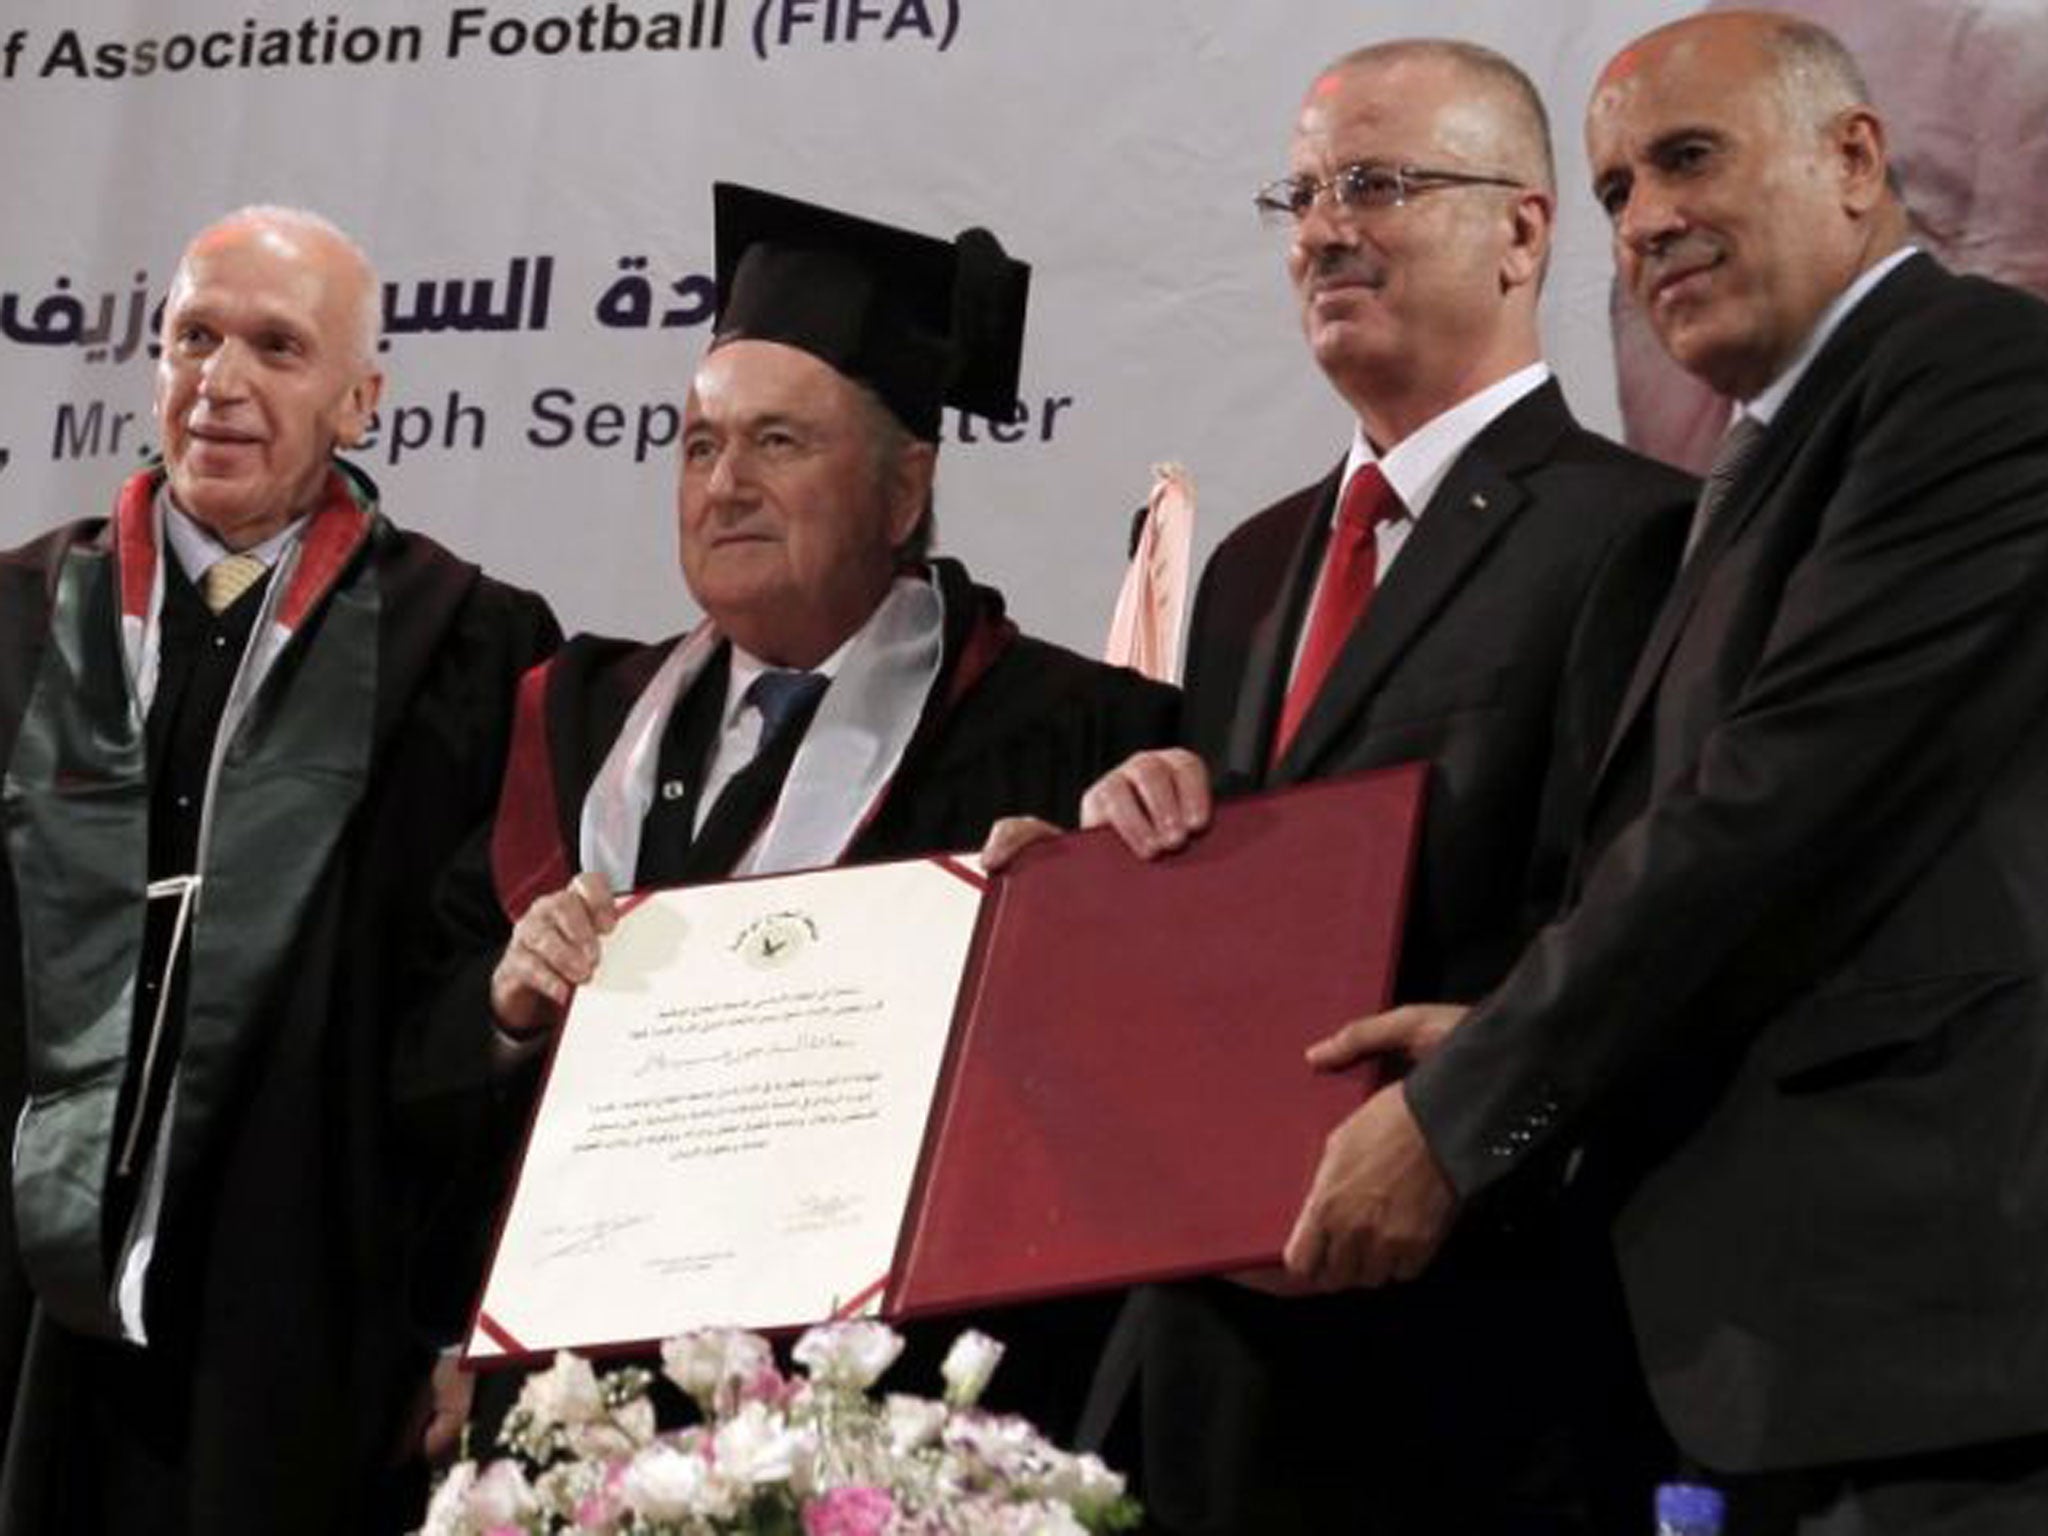 Bitter pill: Sepp Blatter receives an honorary doctorate from Palestinian prime minister Rami Hamdallah; he boasts of being ‘humanitarian of the year’